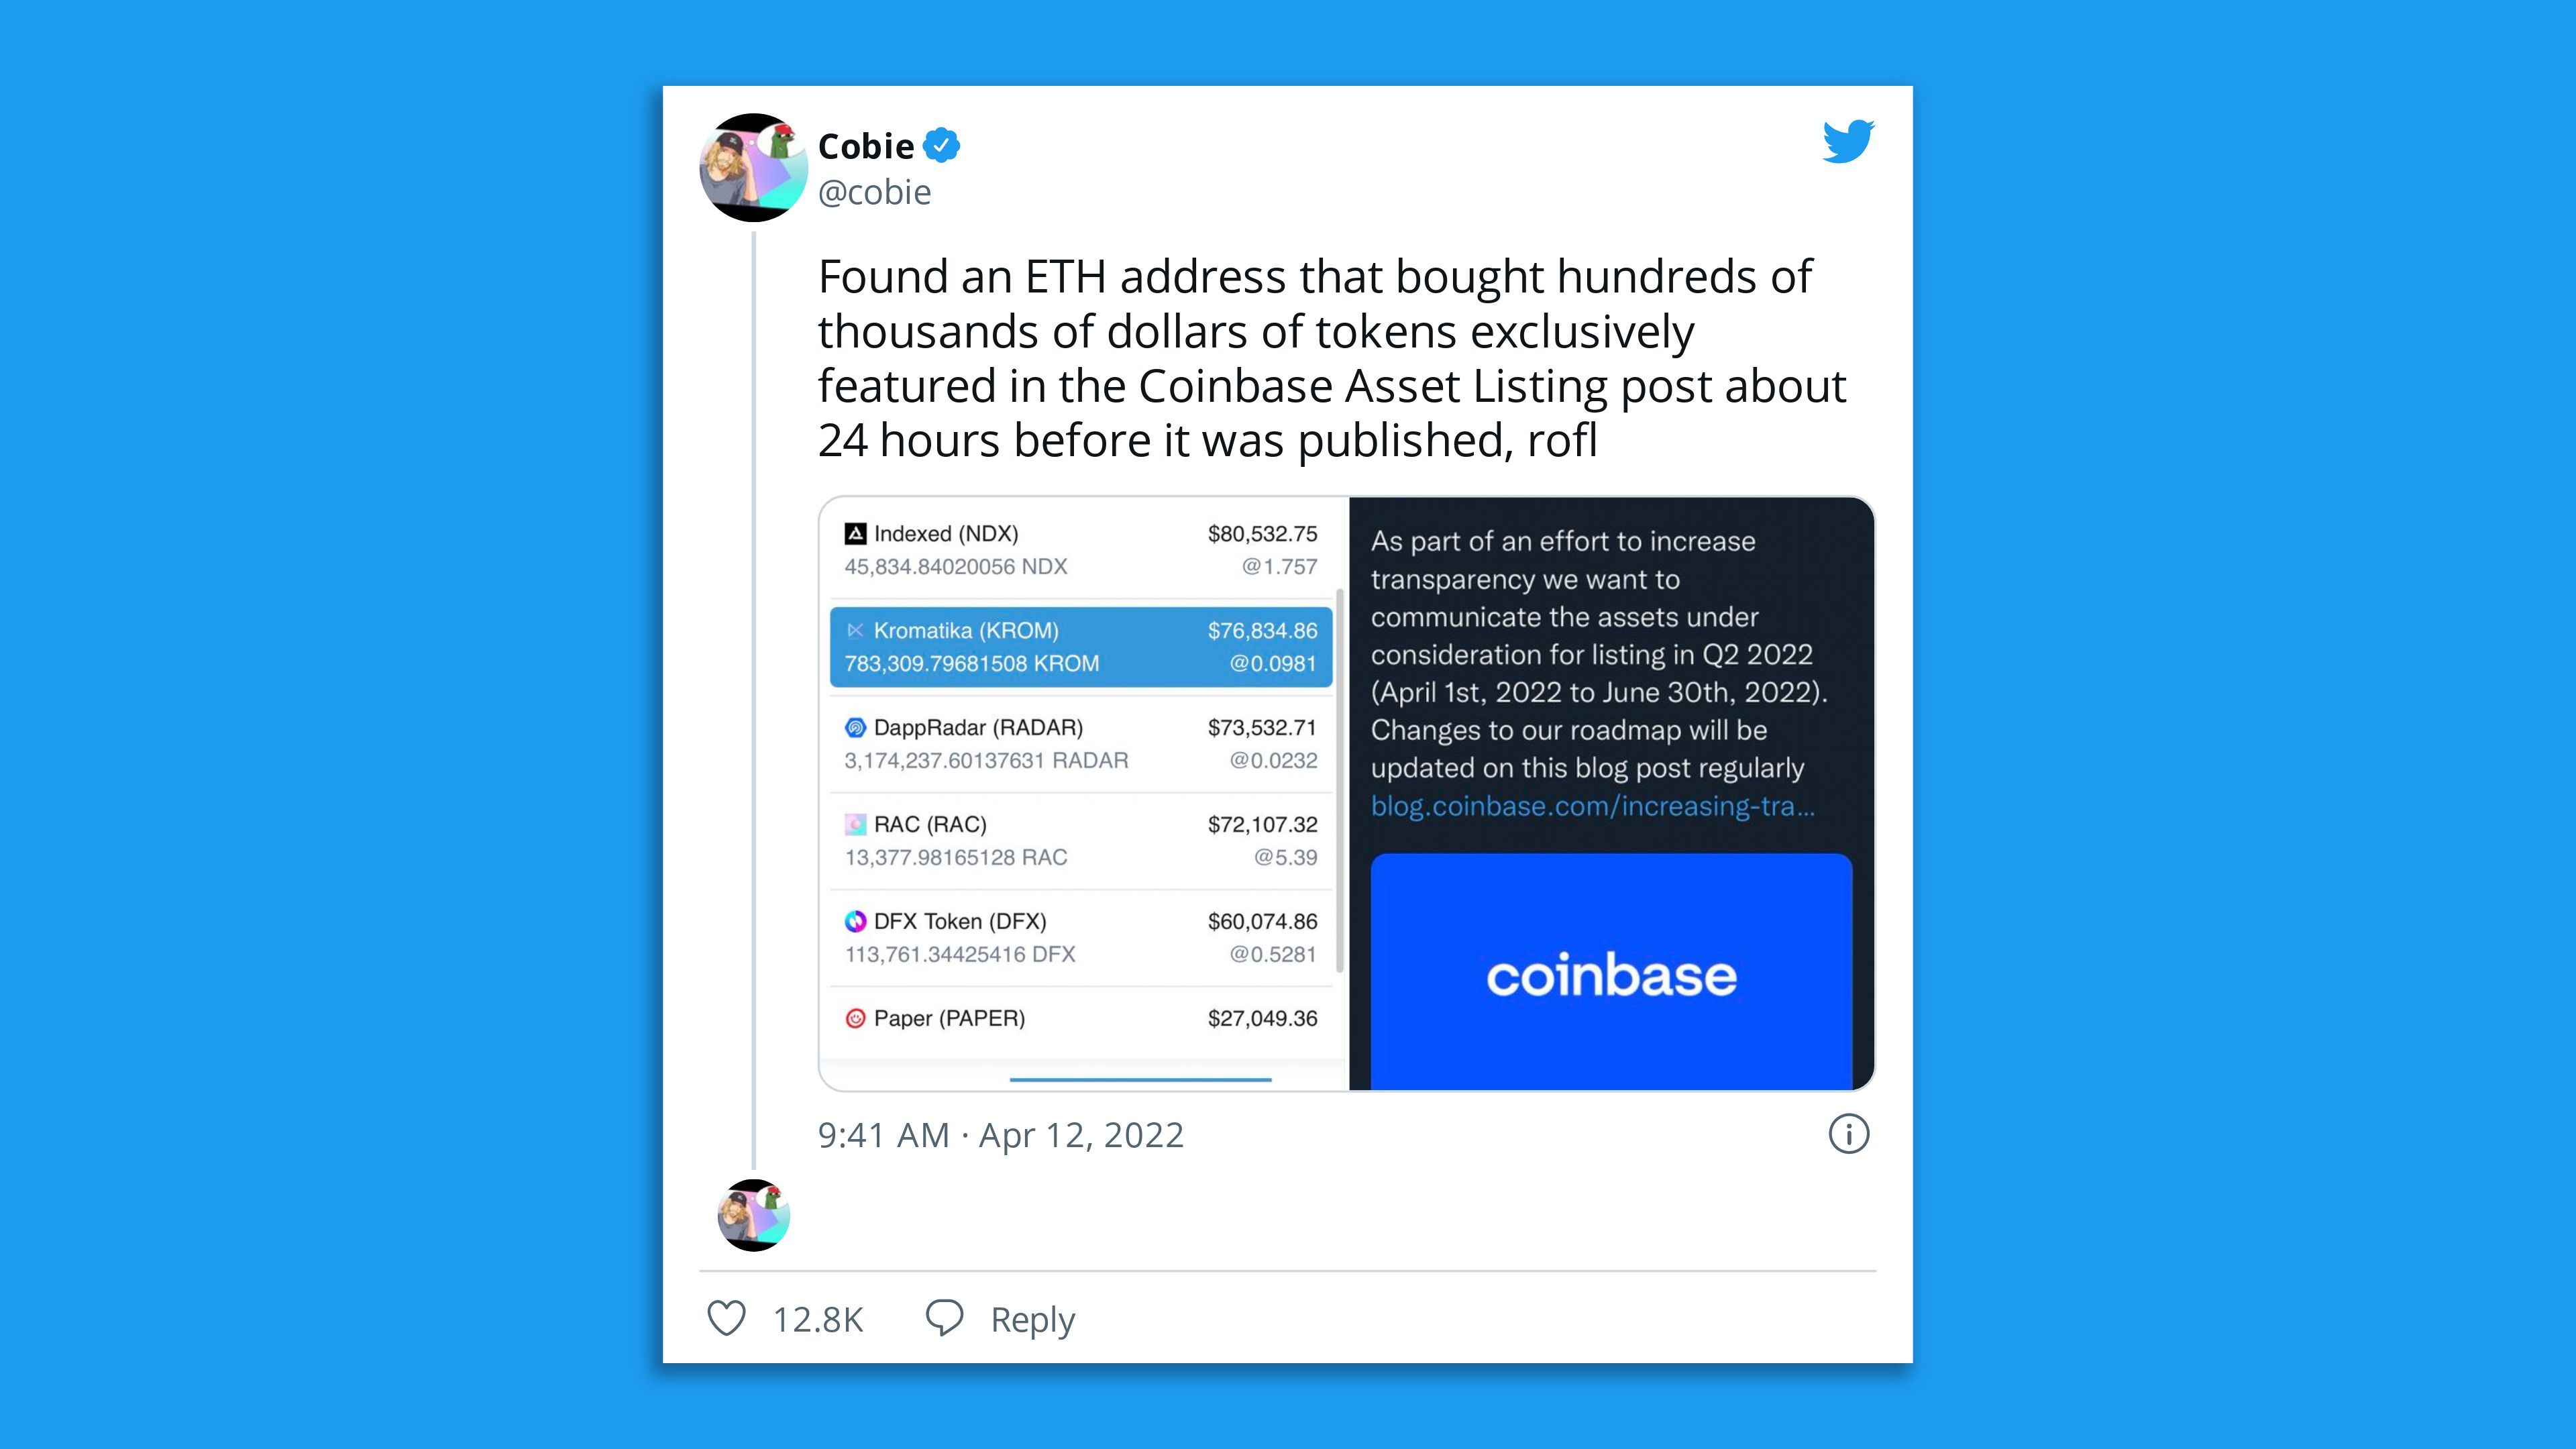 Cobie tweets in case against Coinbase employee